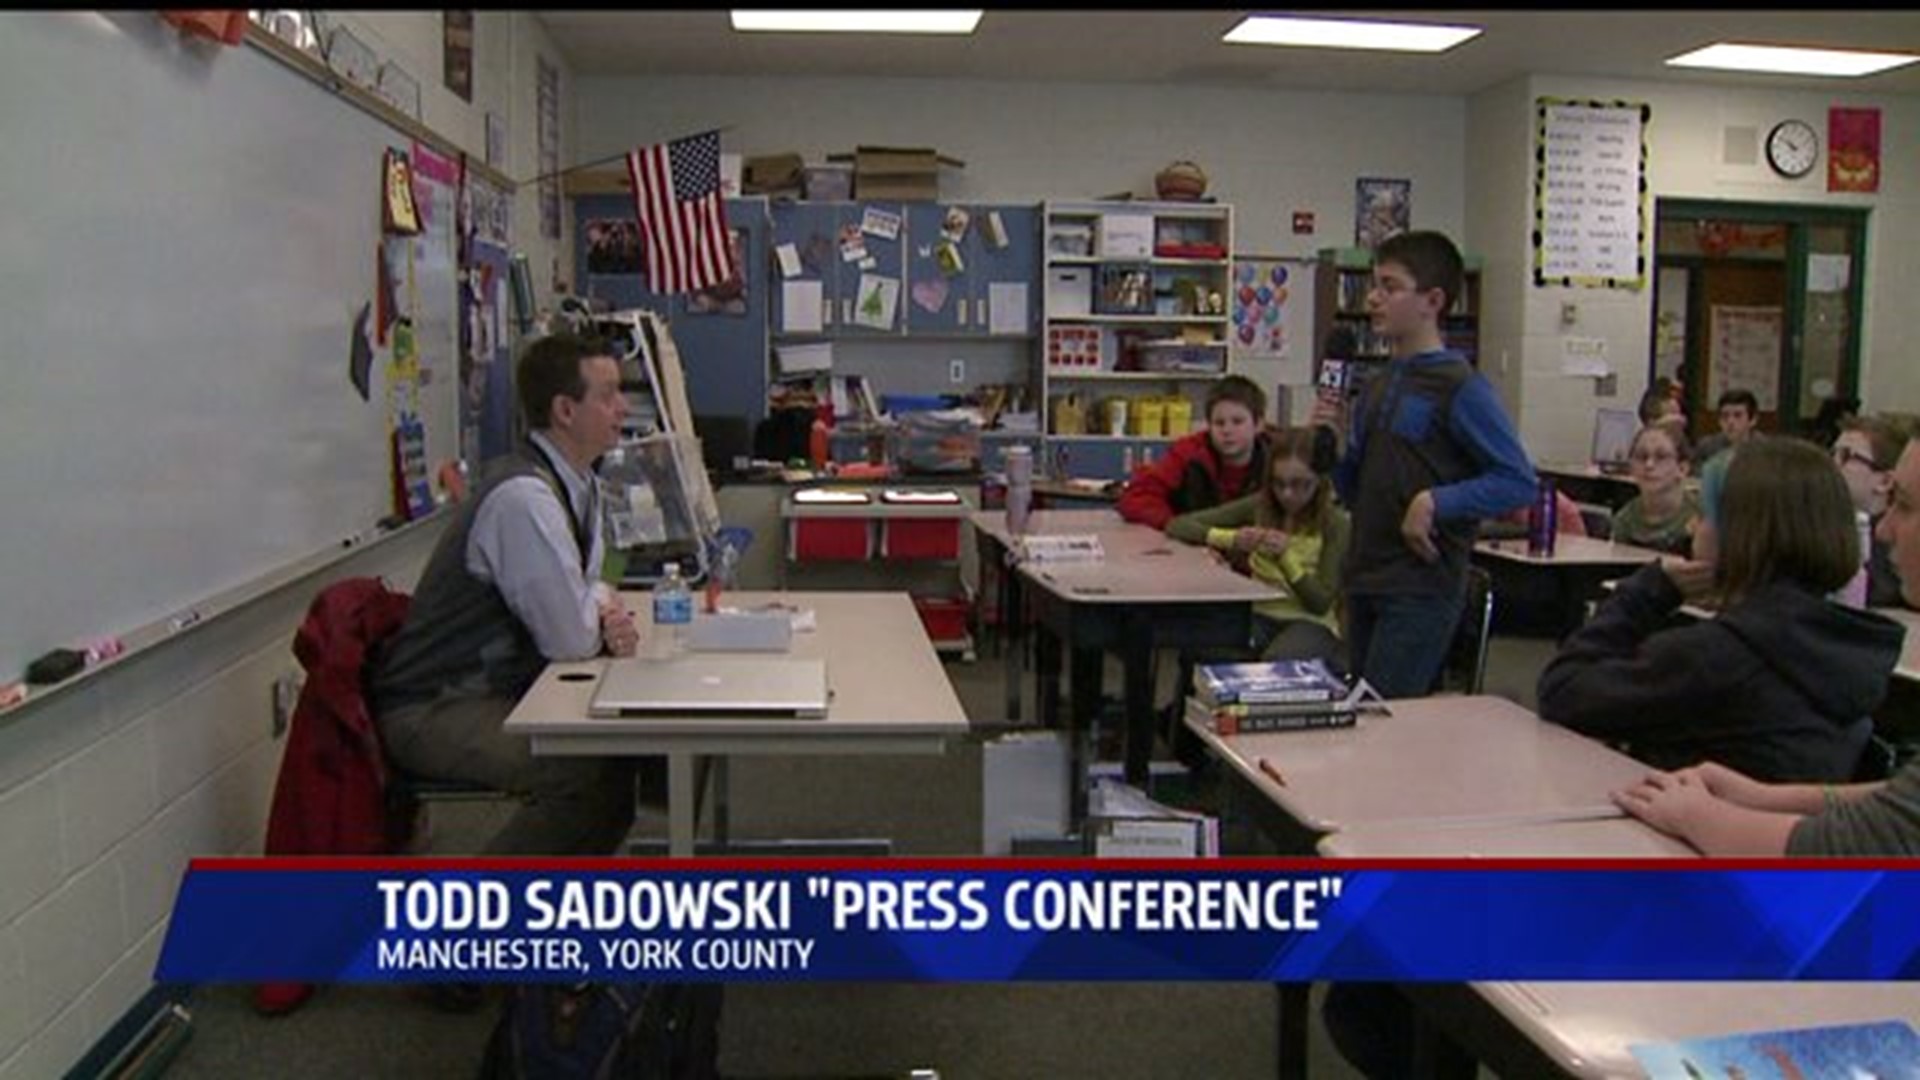 Todd Sadowski visits students at Spring Forge School in Manchester, York County